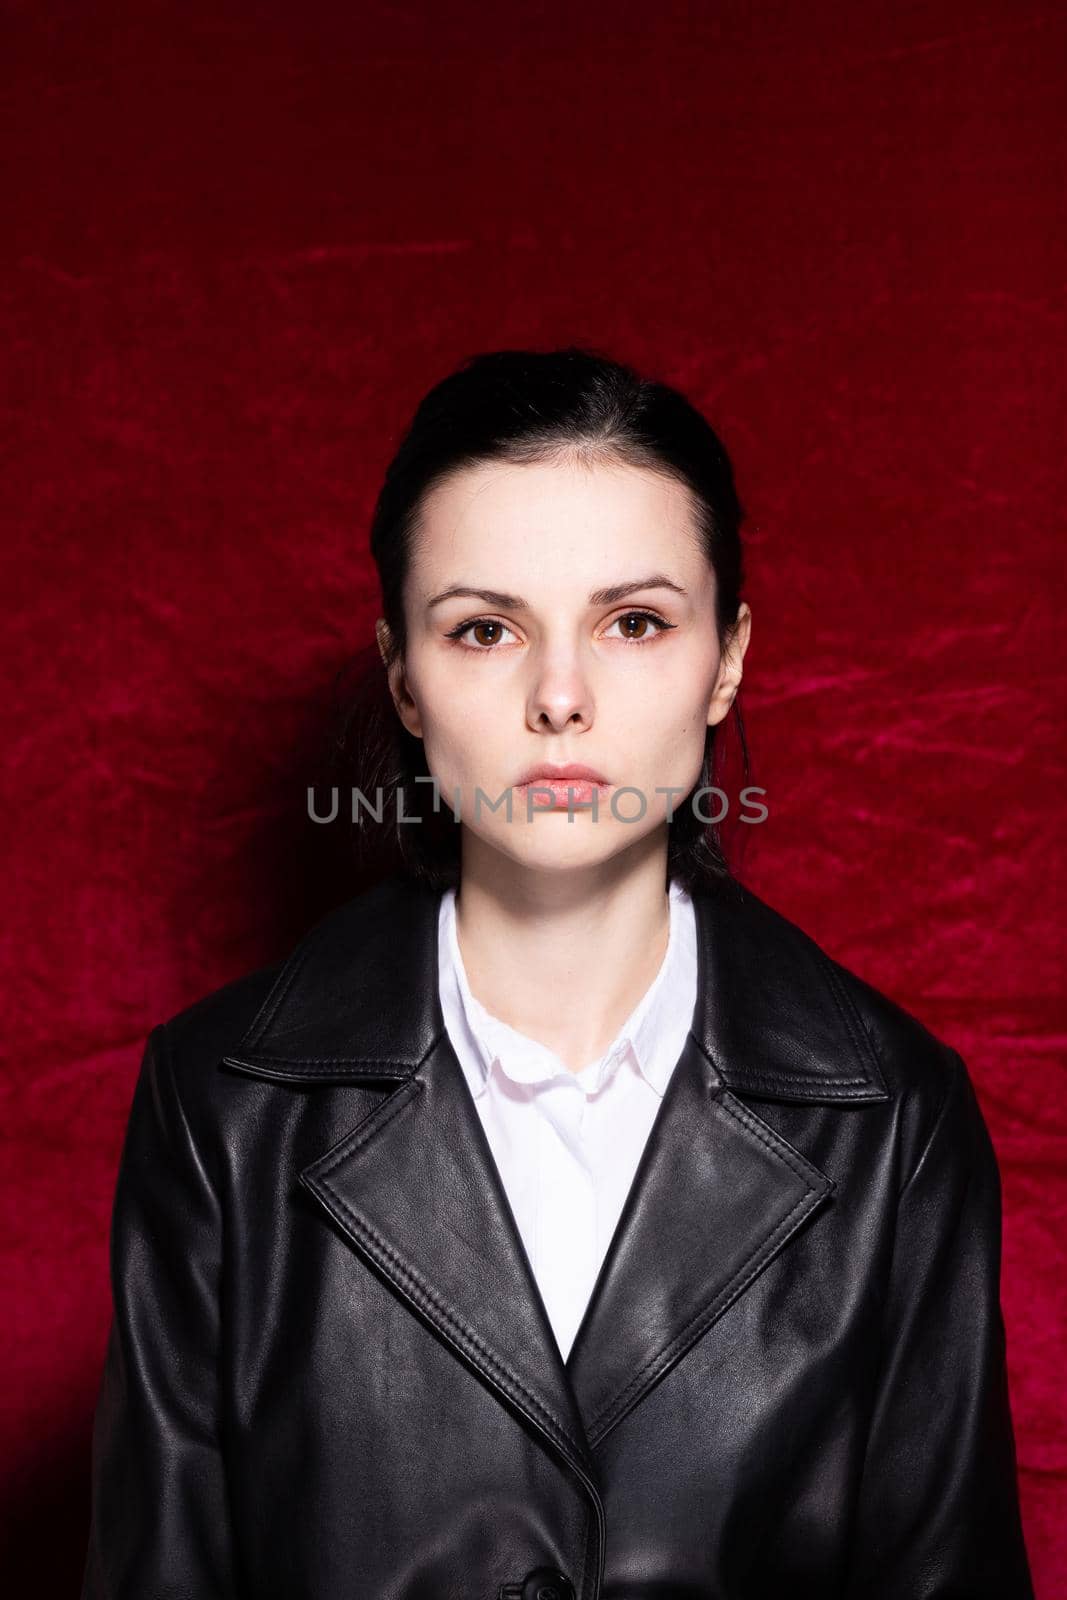 Woman in white shirt and black leather jacket on red velvet background by shilovskaya